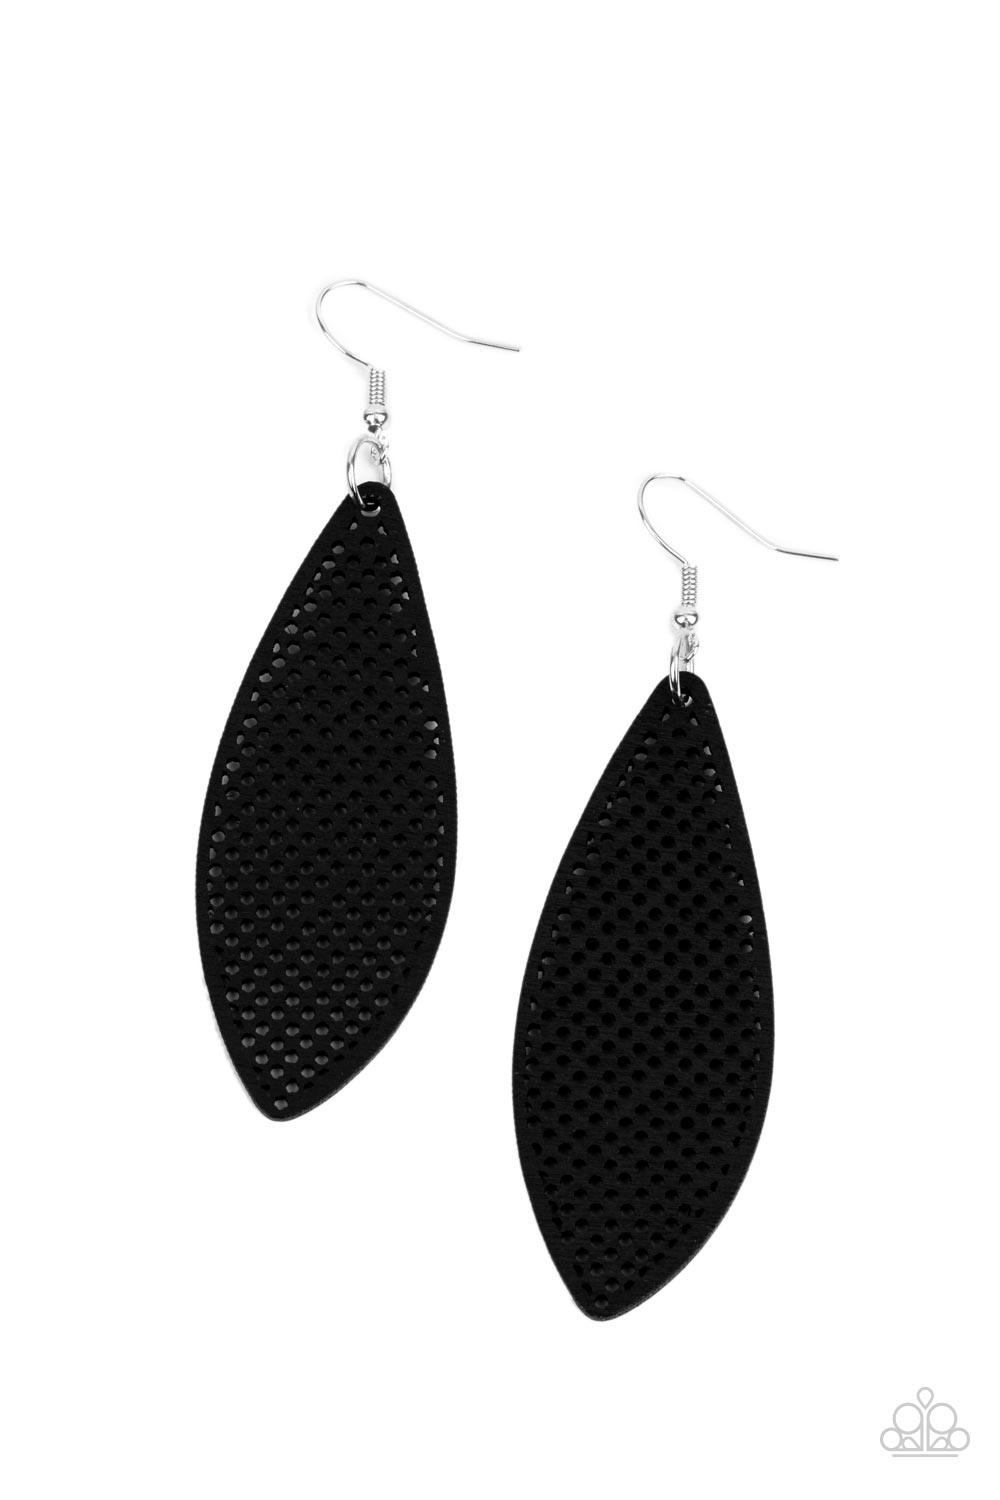 Paparazzi Accessories Surf Scene - Black In an asymmetrical surfboard-like shape, lightweight wooden frames are painted in a deep black finish and filled with a screen-like pattern creating a whimsically beachy design. Earring attaches to a standard fishh